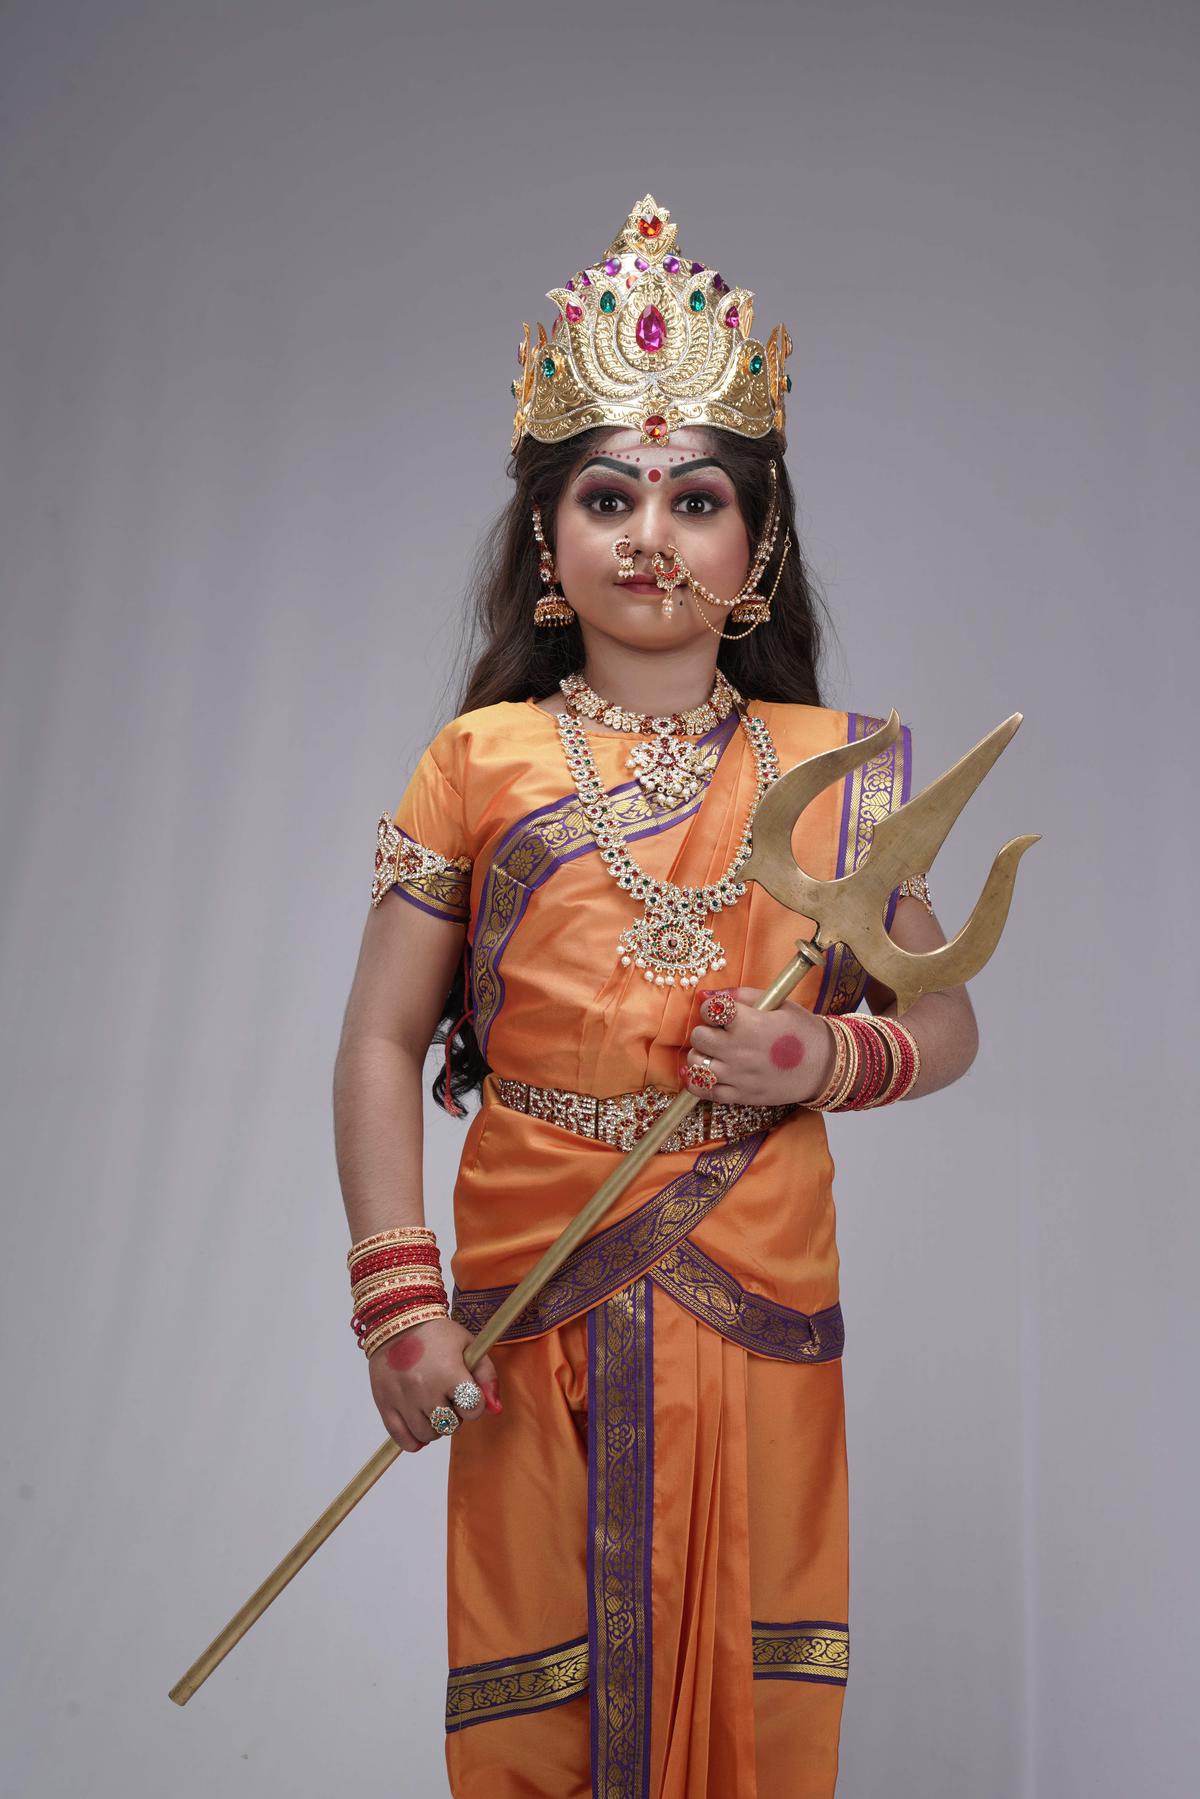 Rachana TB in a still from the series